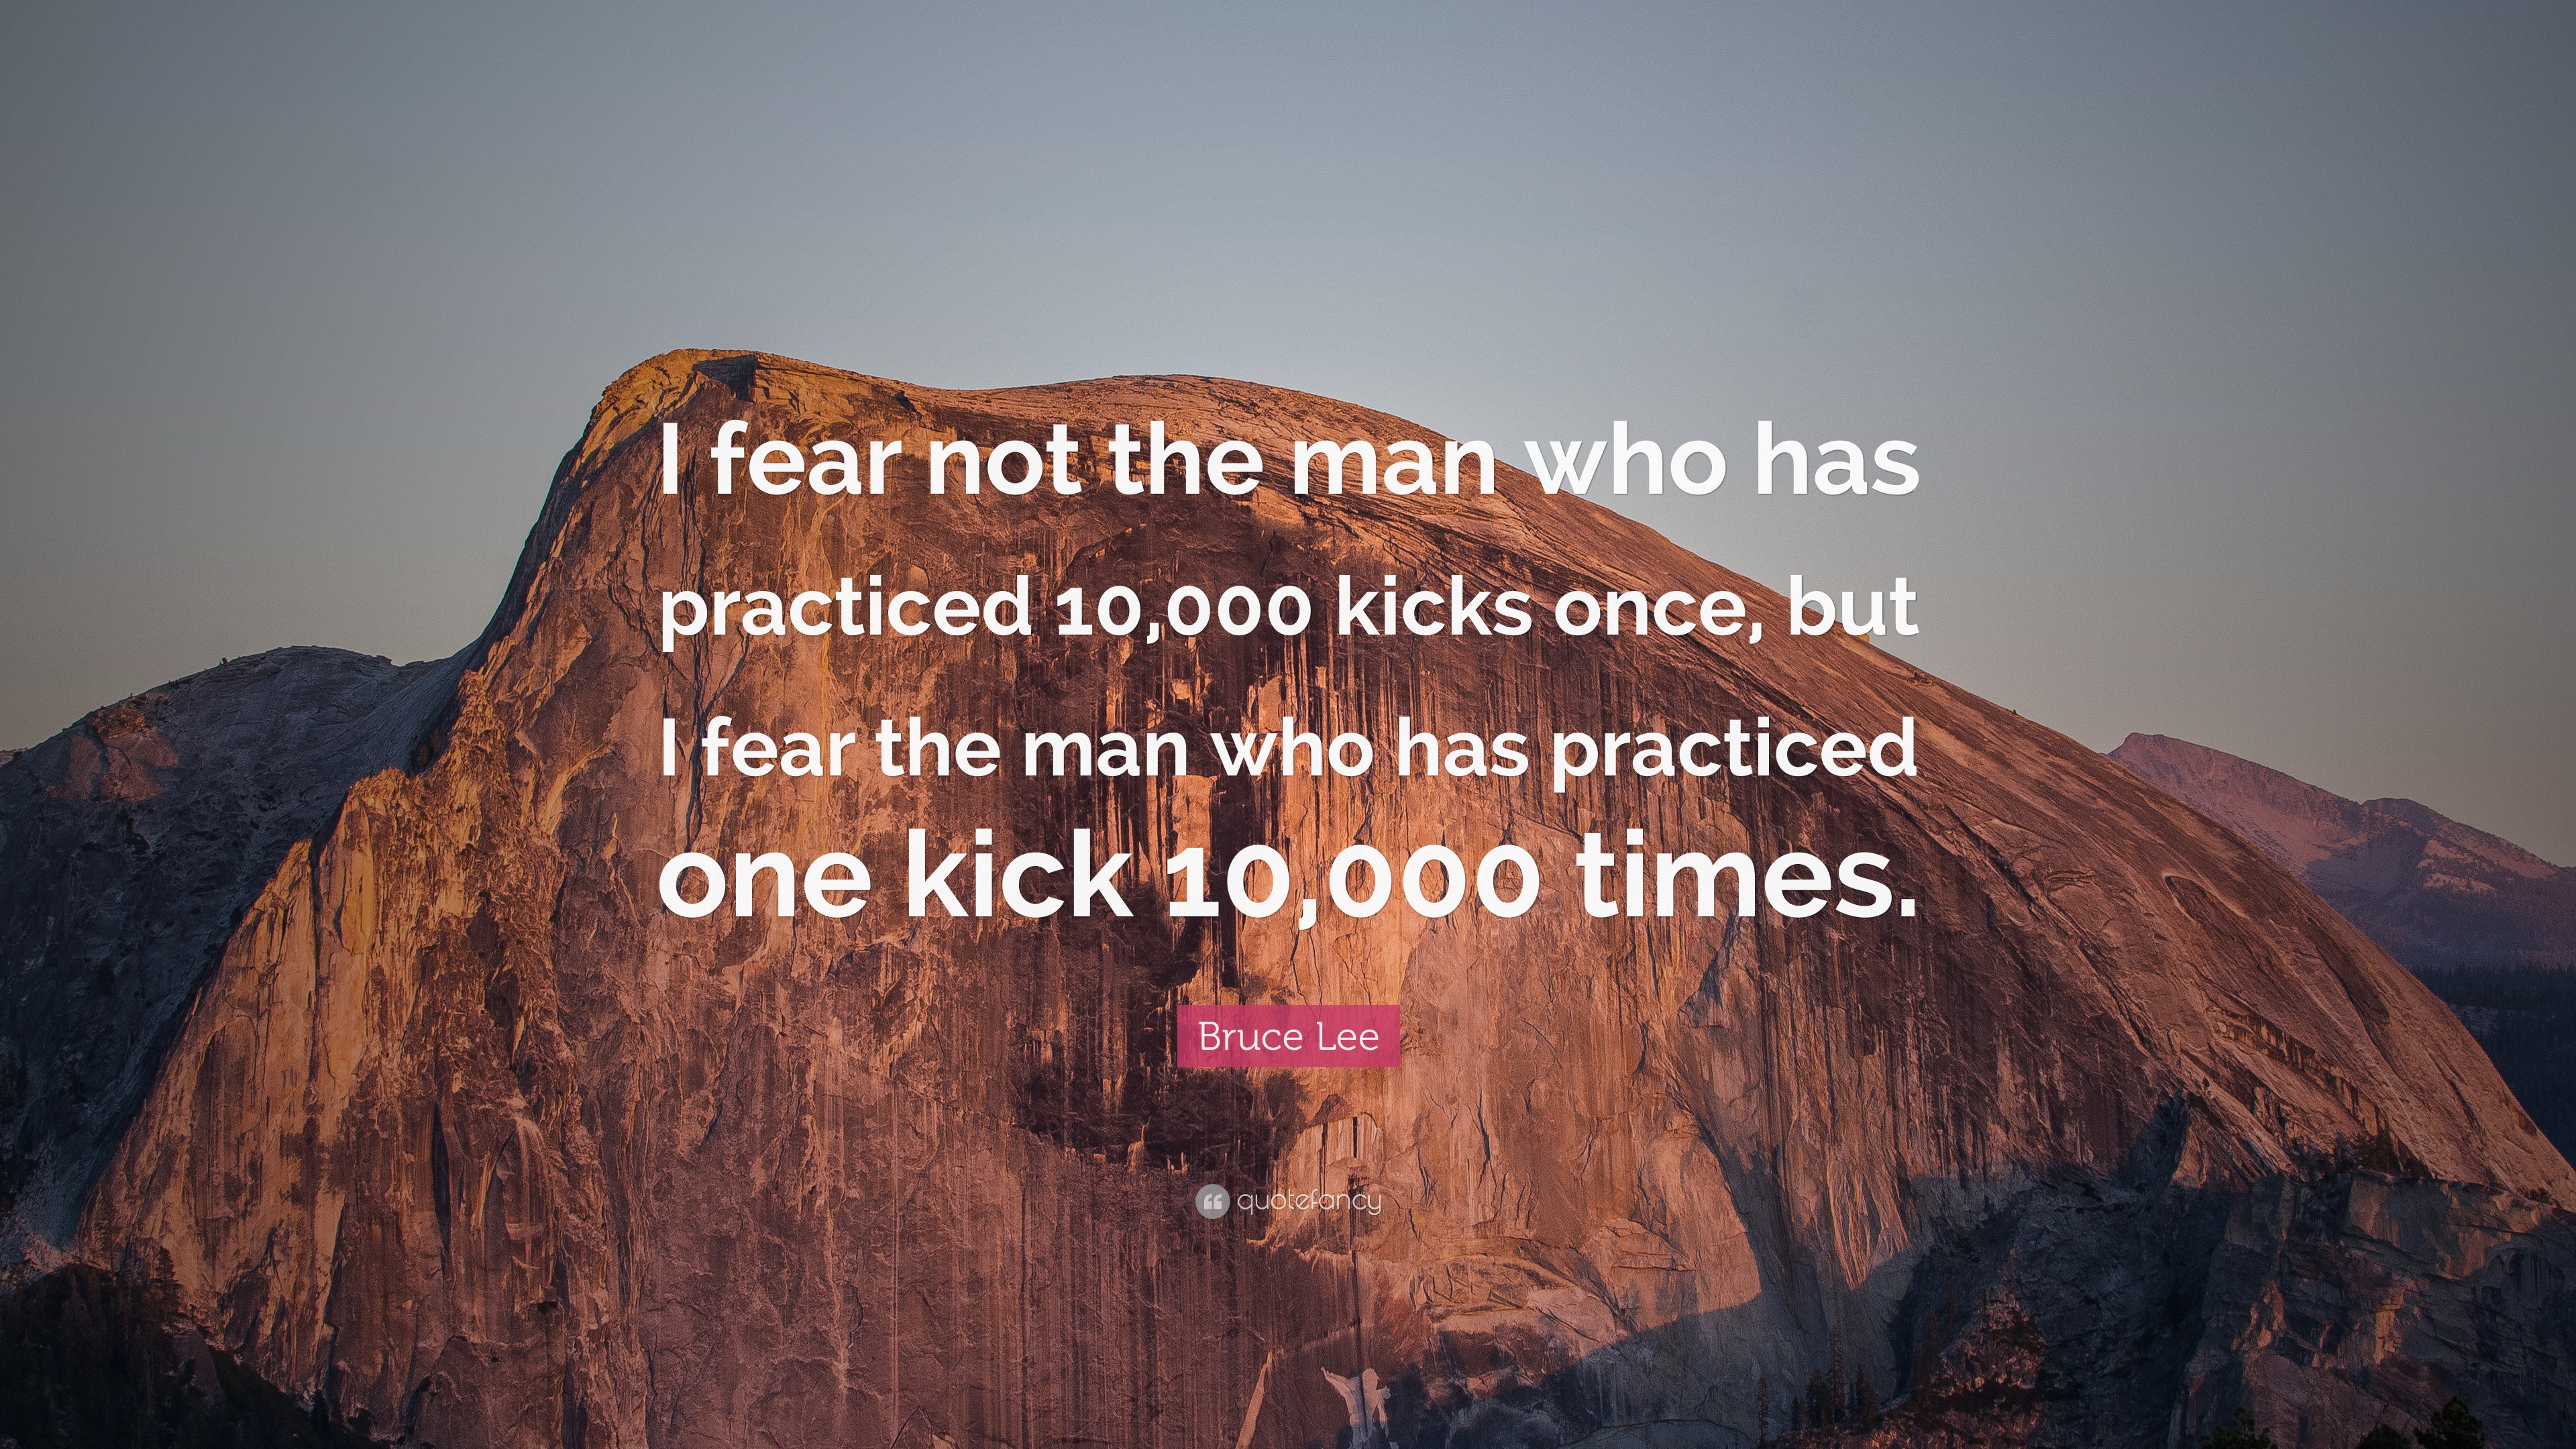 Bruce Lee Quote “I fear not the man who has practiced